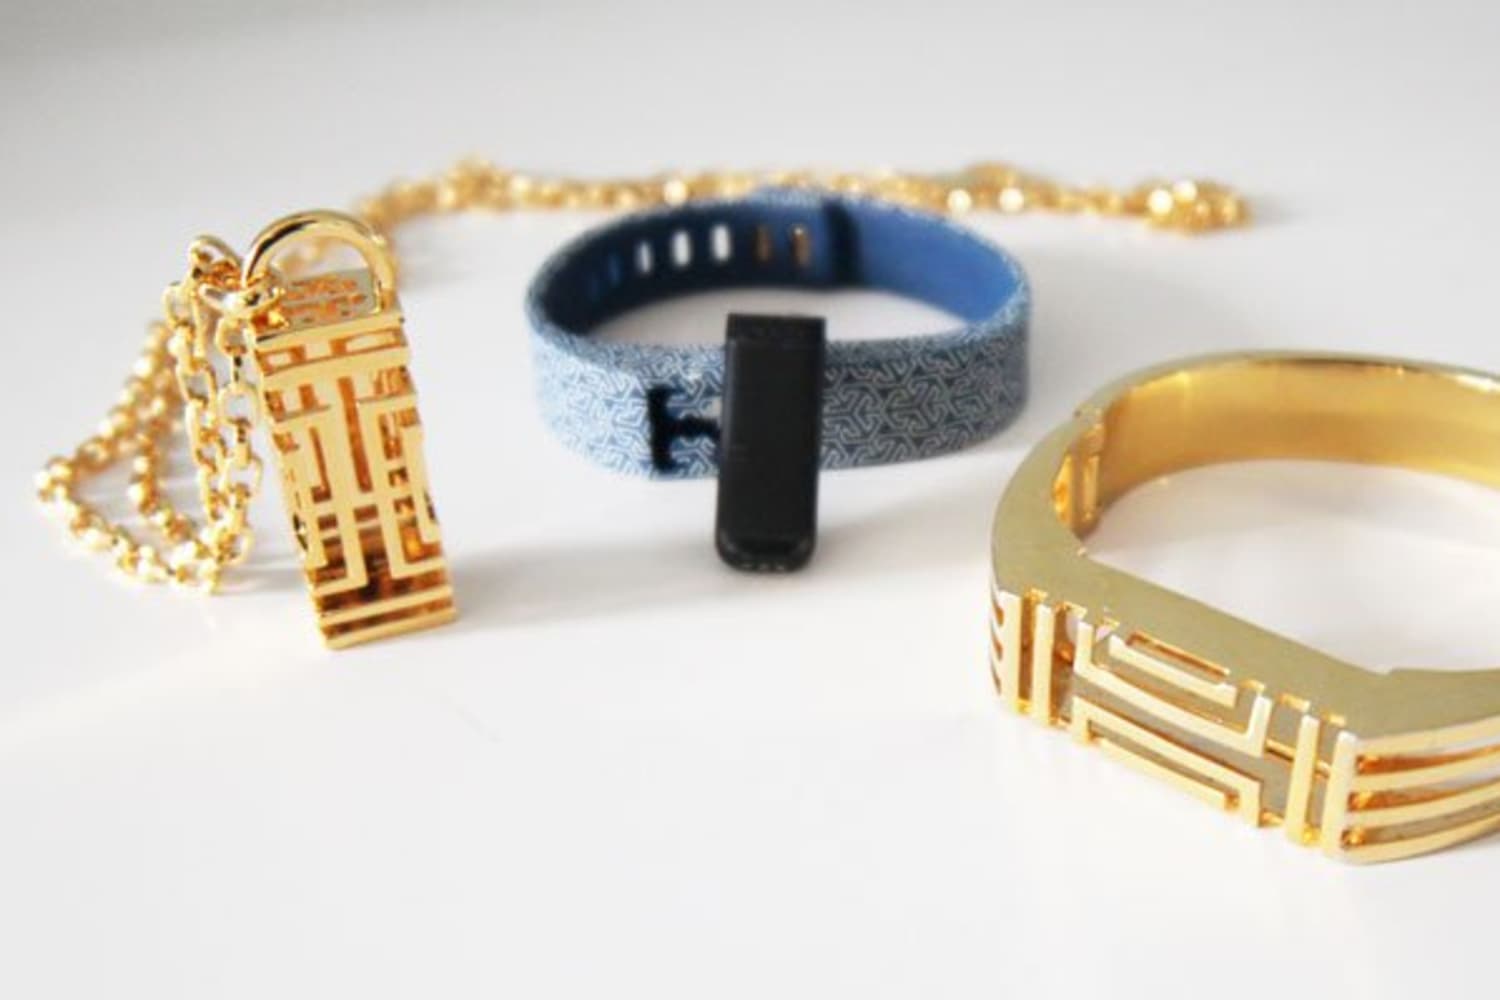 Tory Burch for FitBit | Apartment Therapy